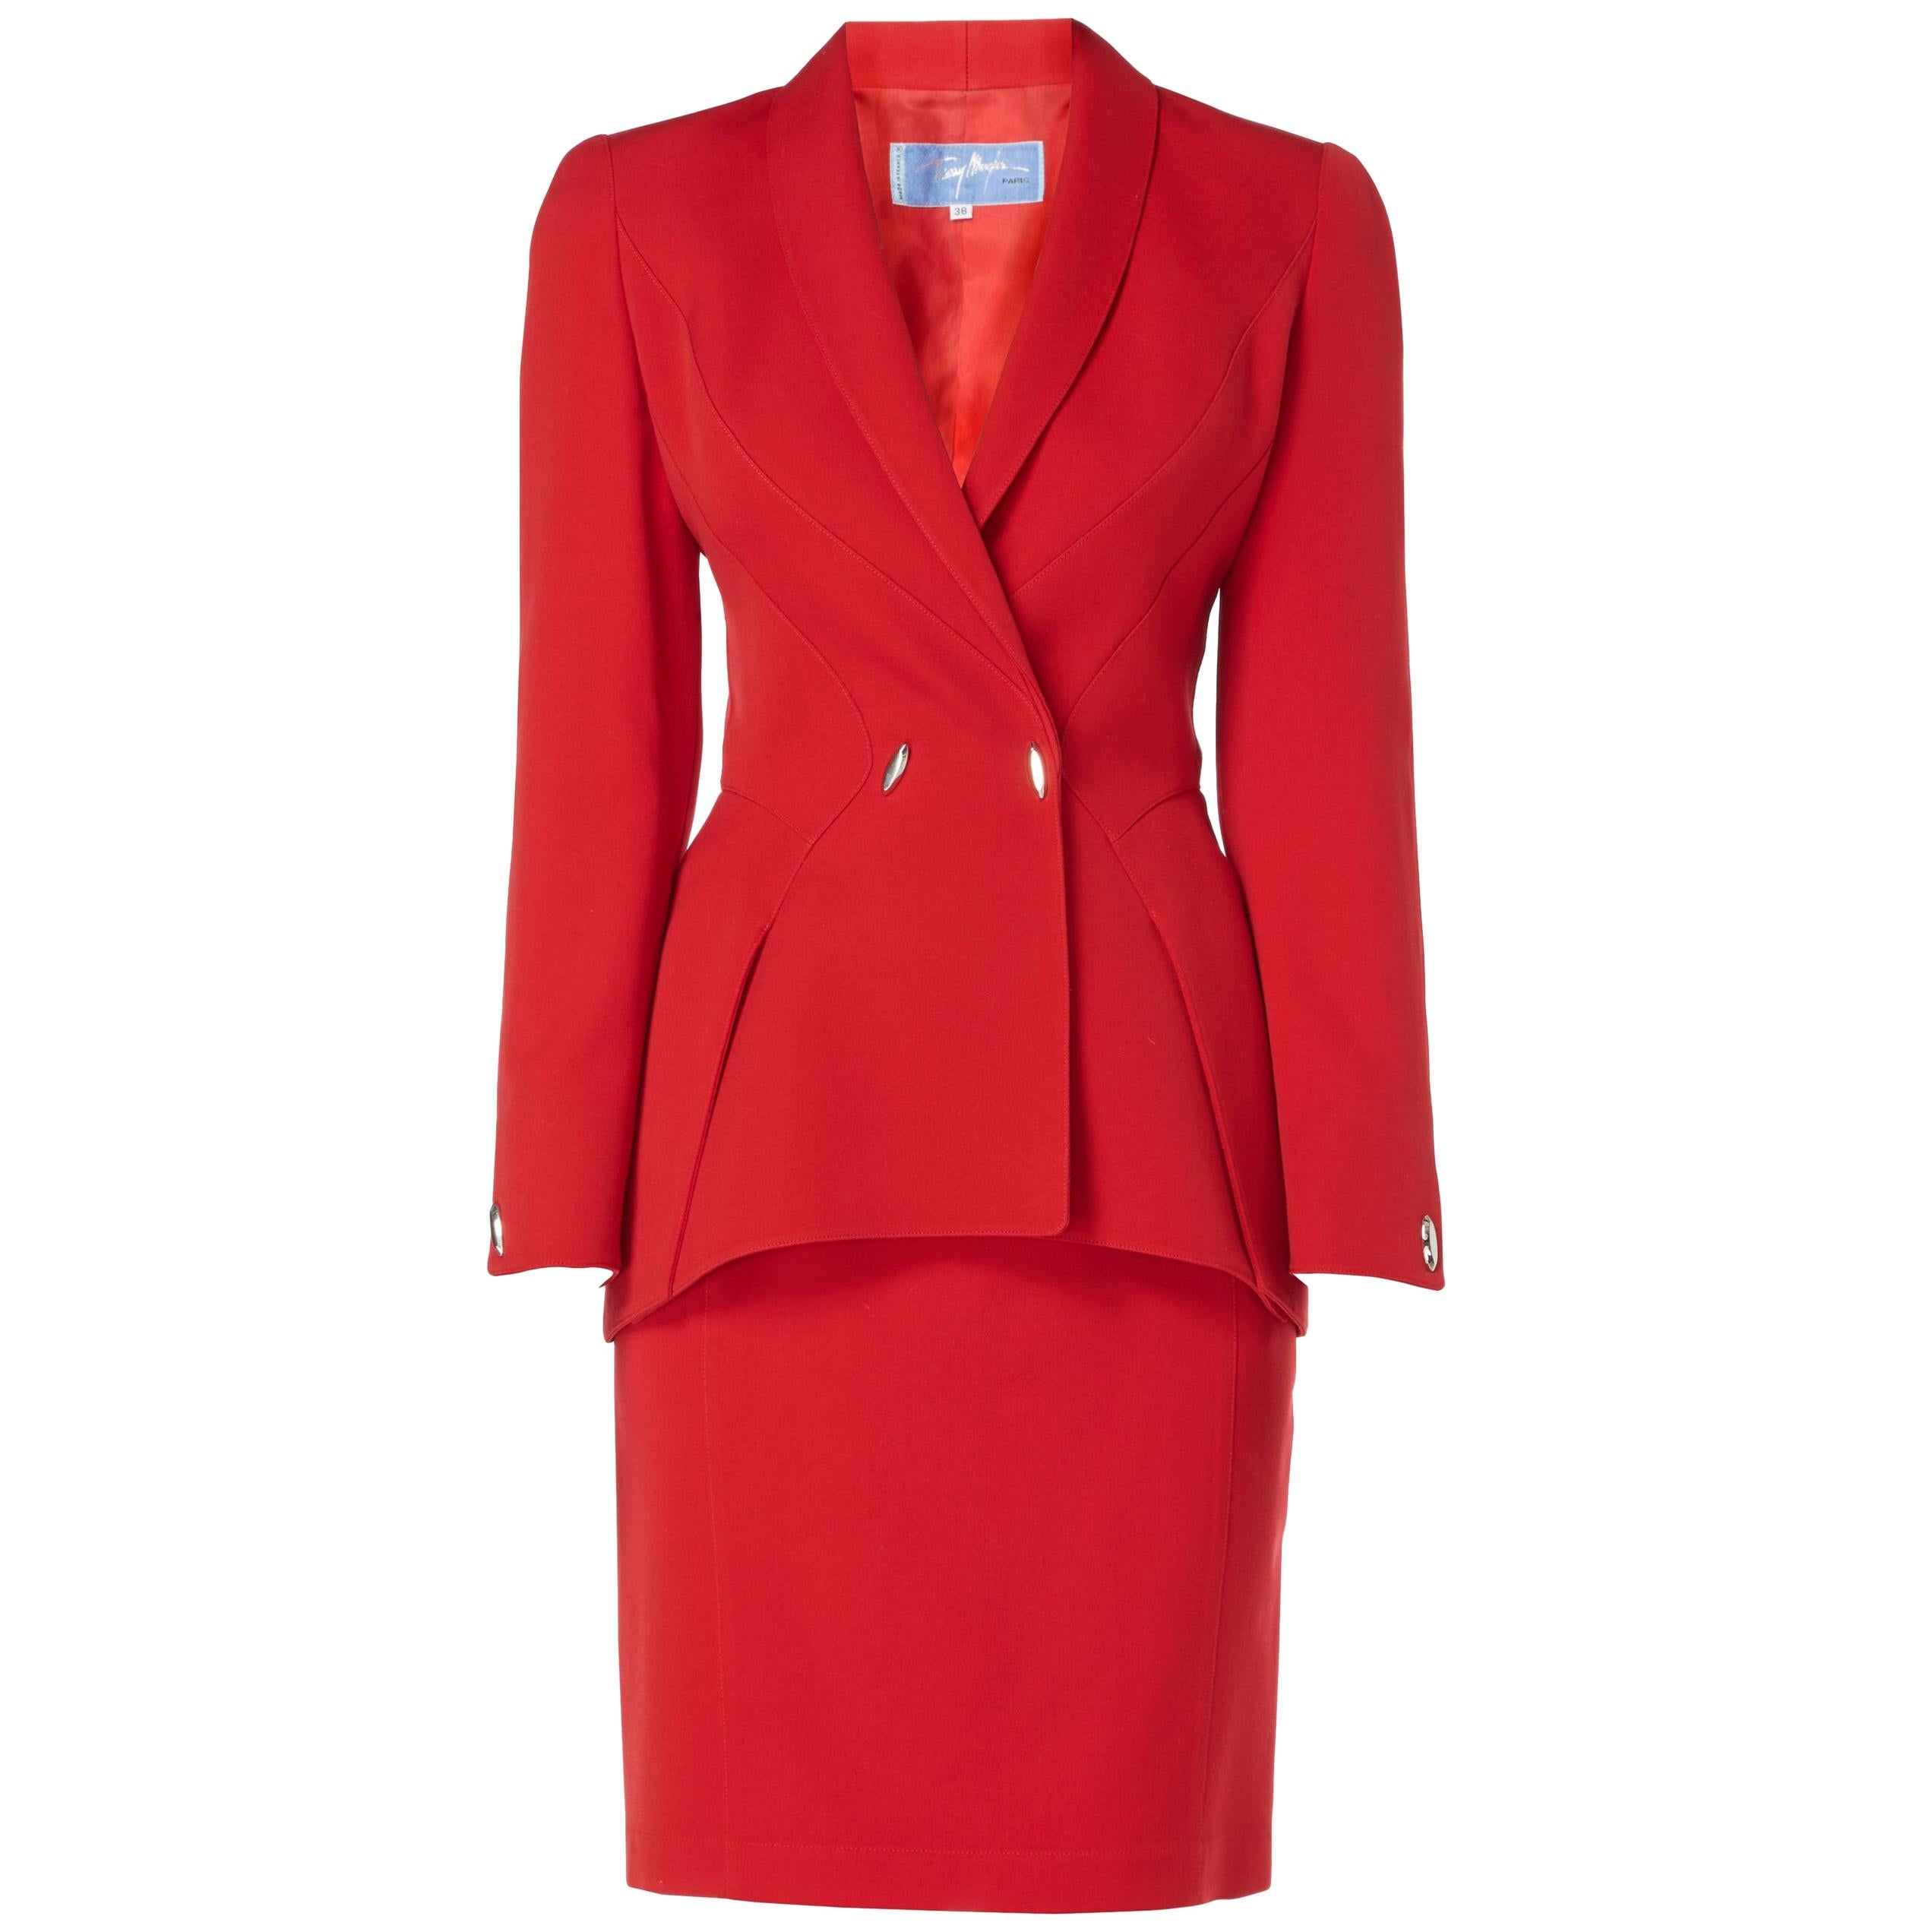 Thierry Mugler, Red Skirt Suit, circa 1991 For Sale